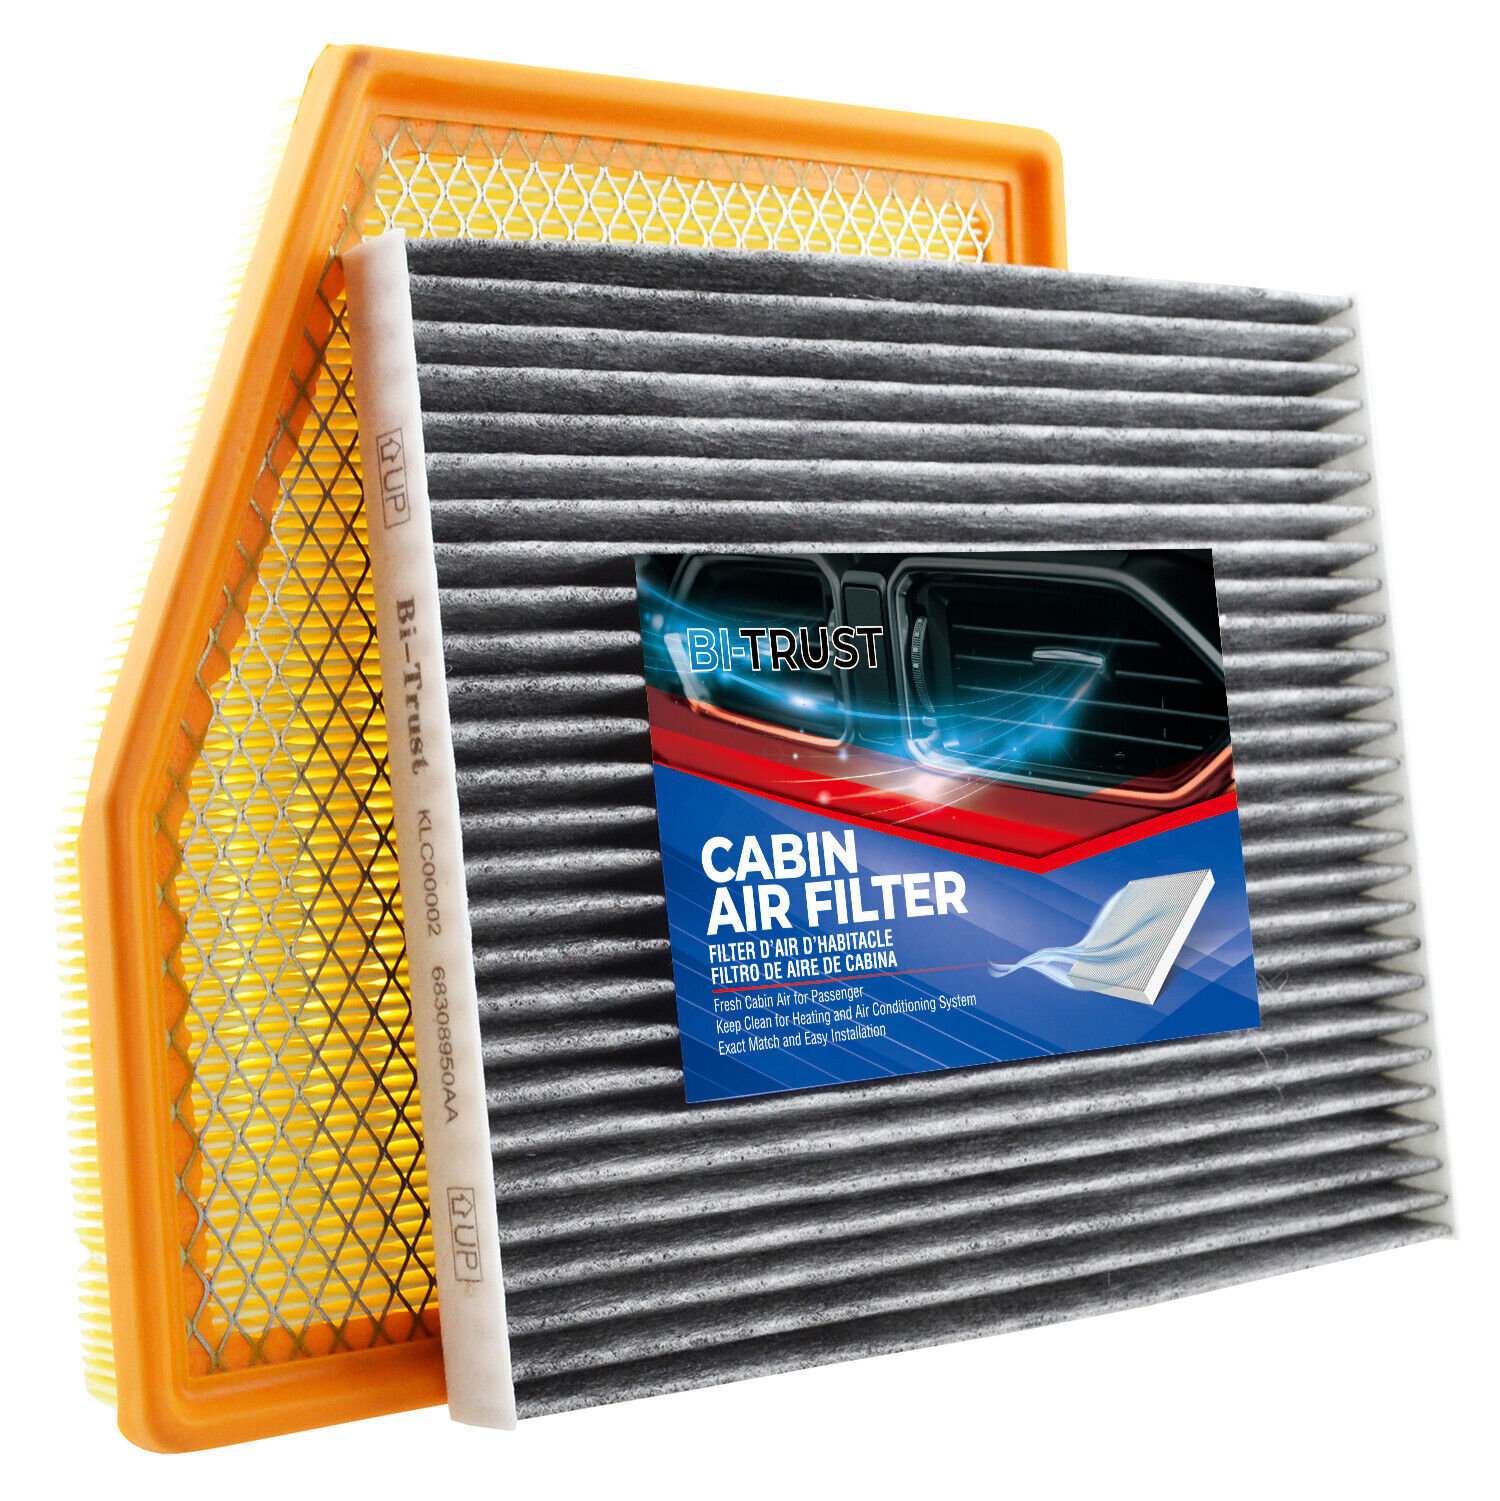 Air Filter Combo Kit for Chrysler Grand Caravan Pacifica Voyager, Engine & Cabin